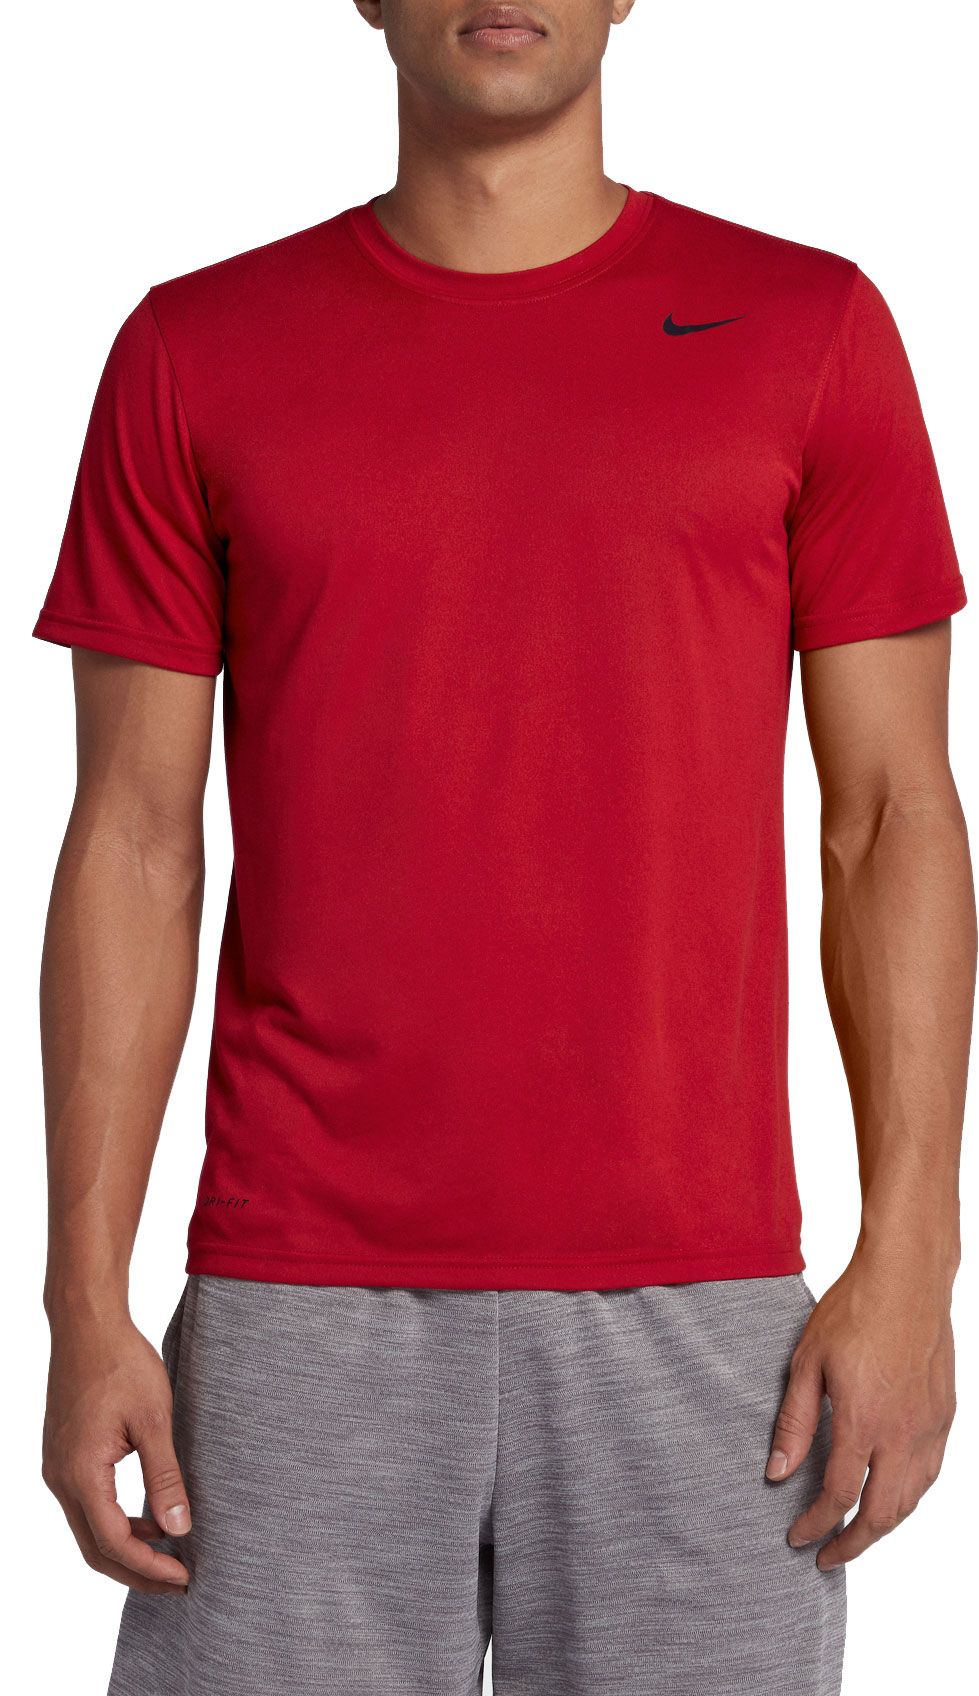 Red Nike Shirts Best Price Guarantee At Dick S